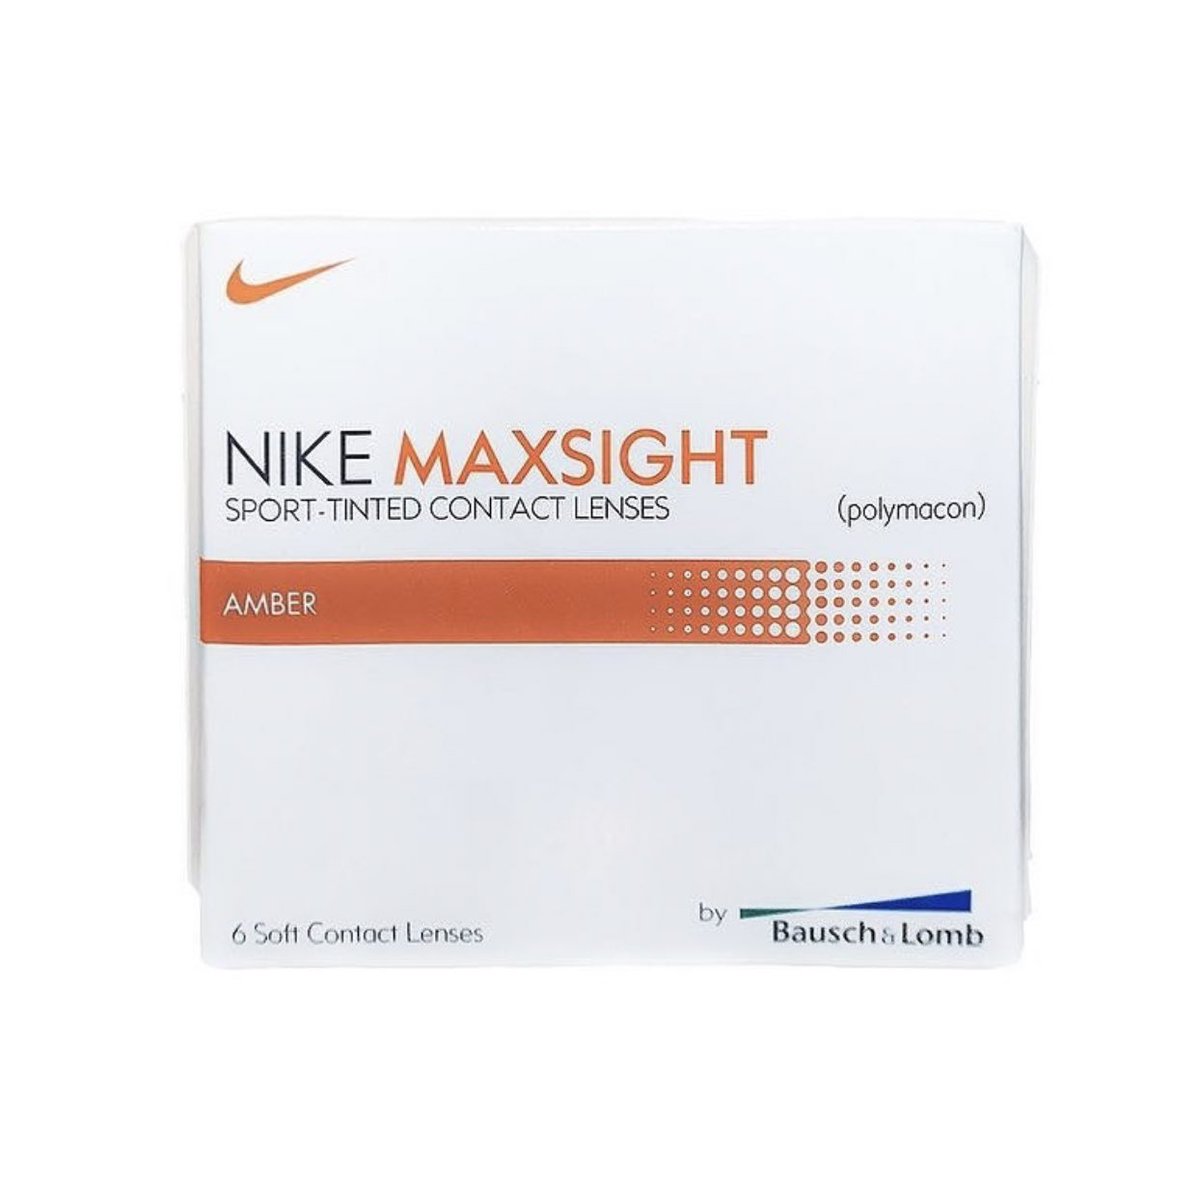 Banned Nike × Bausch & Lomb UV-blocking contact lenses that helped athletes to see fast-moving objects (2006)